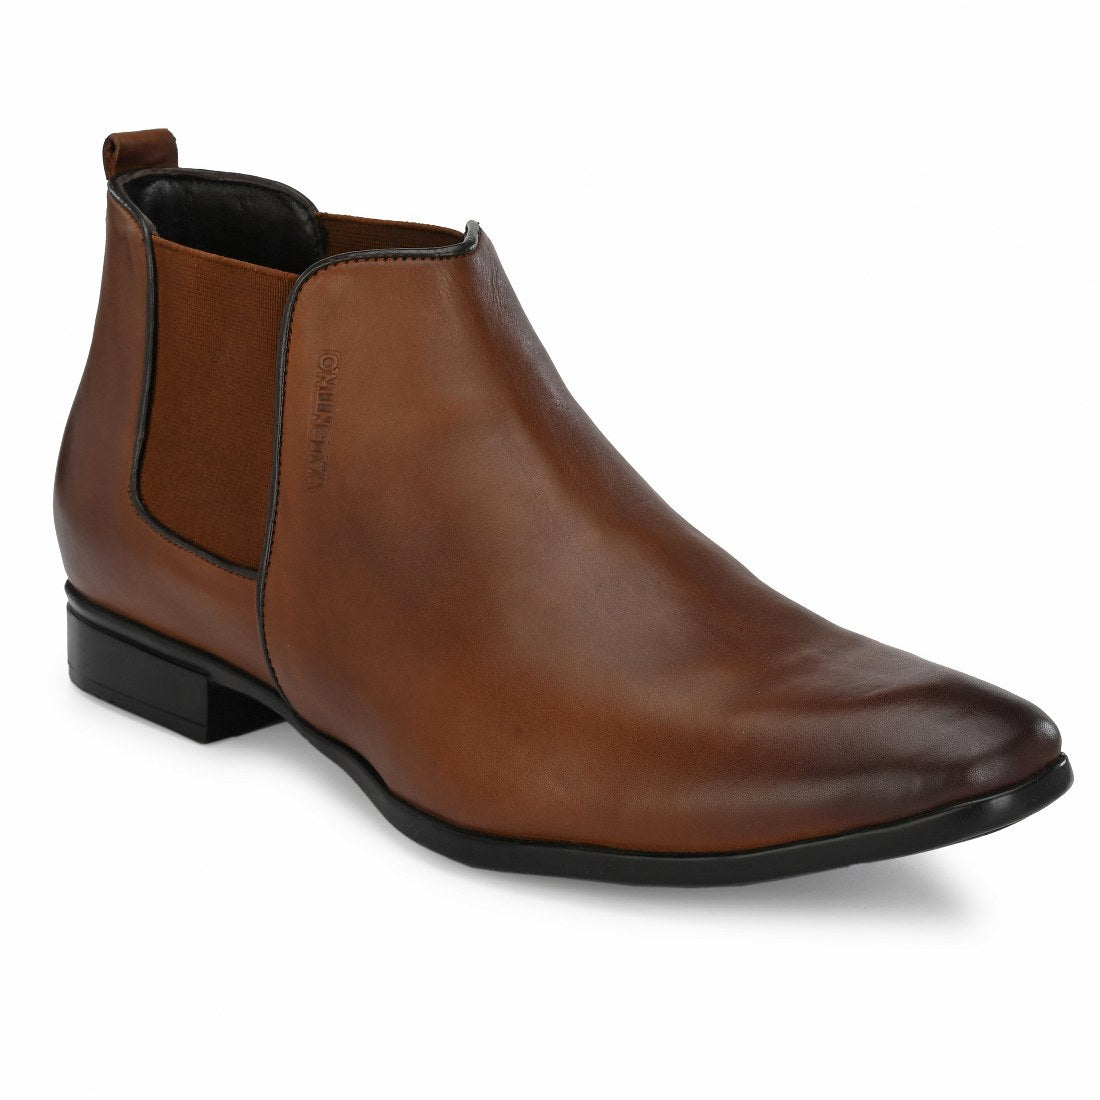 REFORM-85 MEN LEATHER BROWN FORMAL BOOT ANKLE CHELSEA